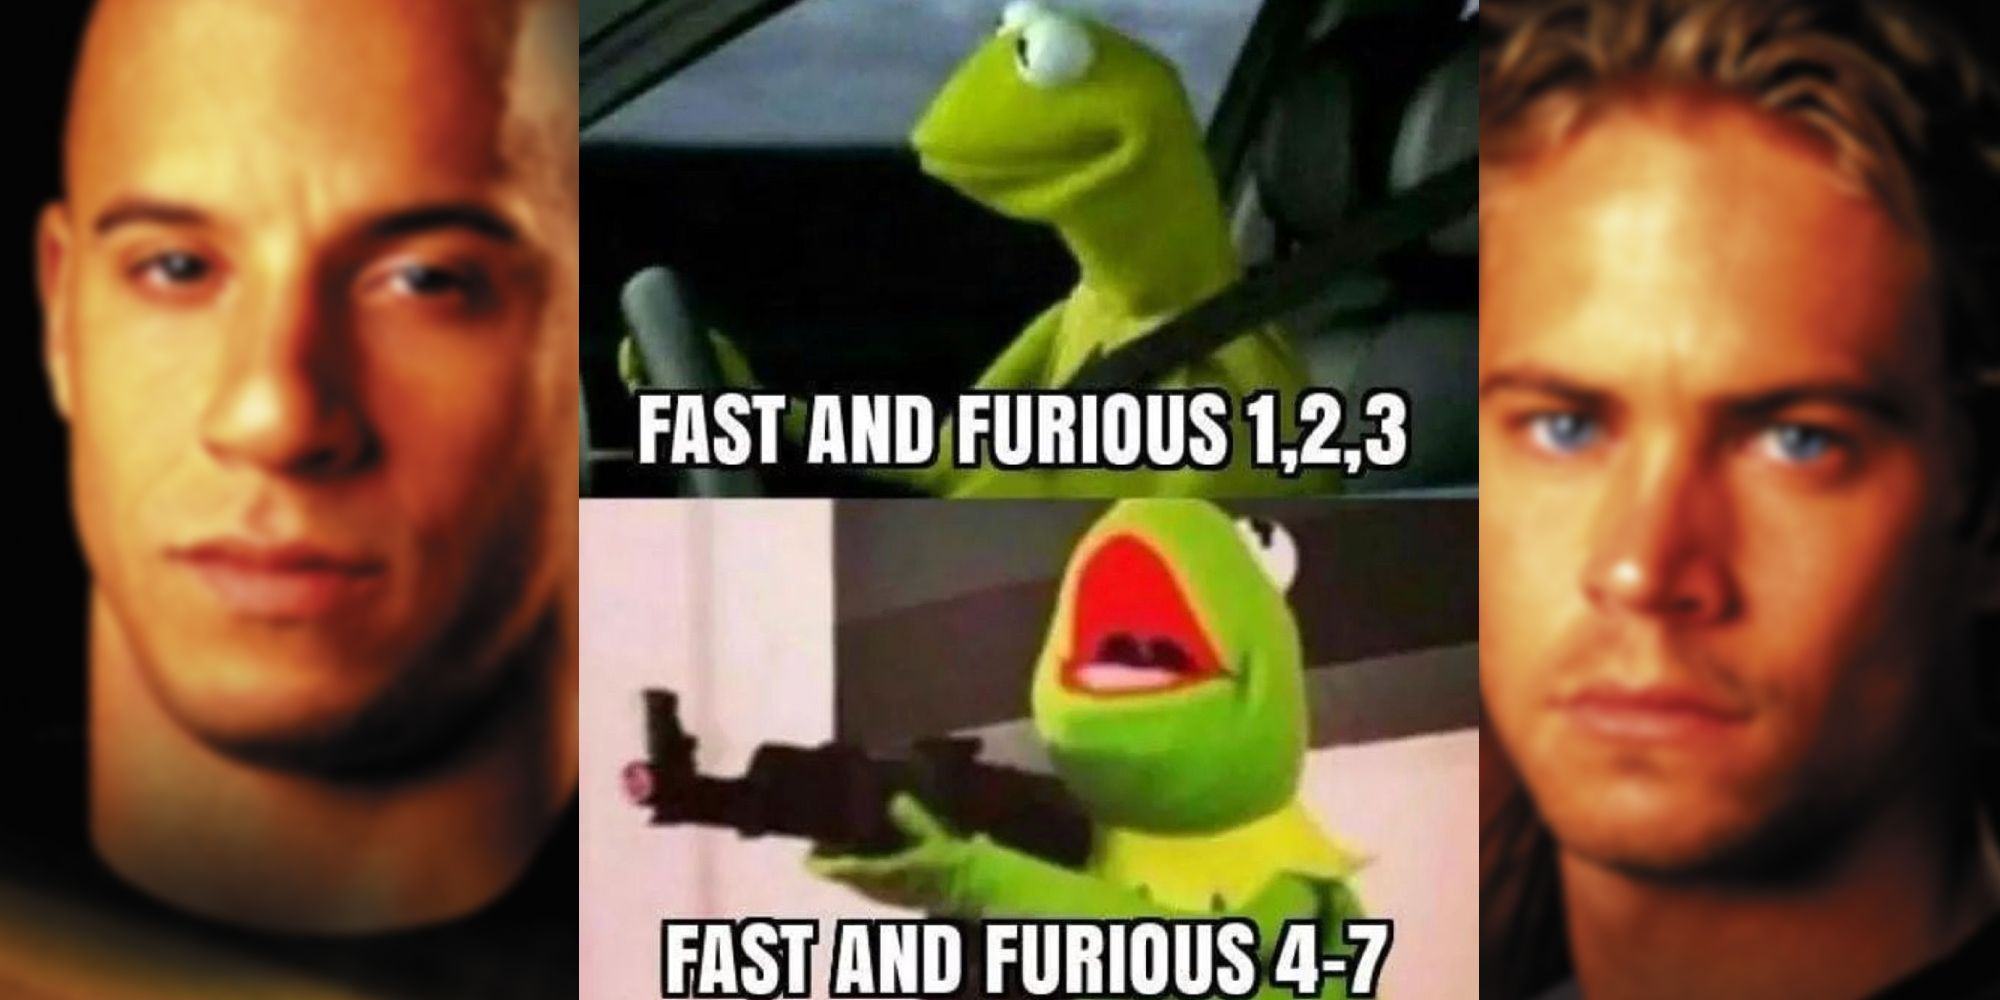 Kermit in the Fast and Deadly meme.